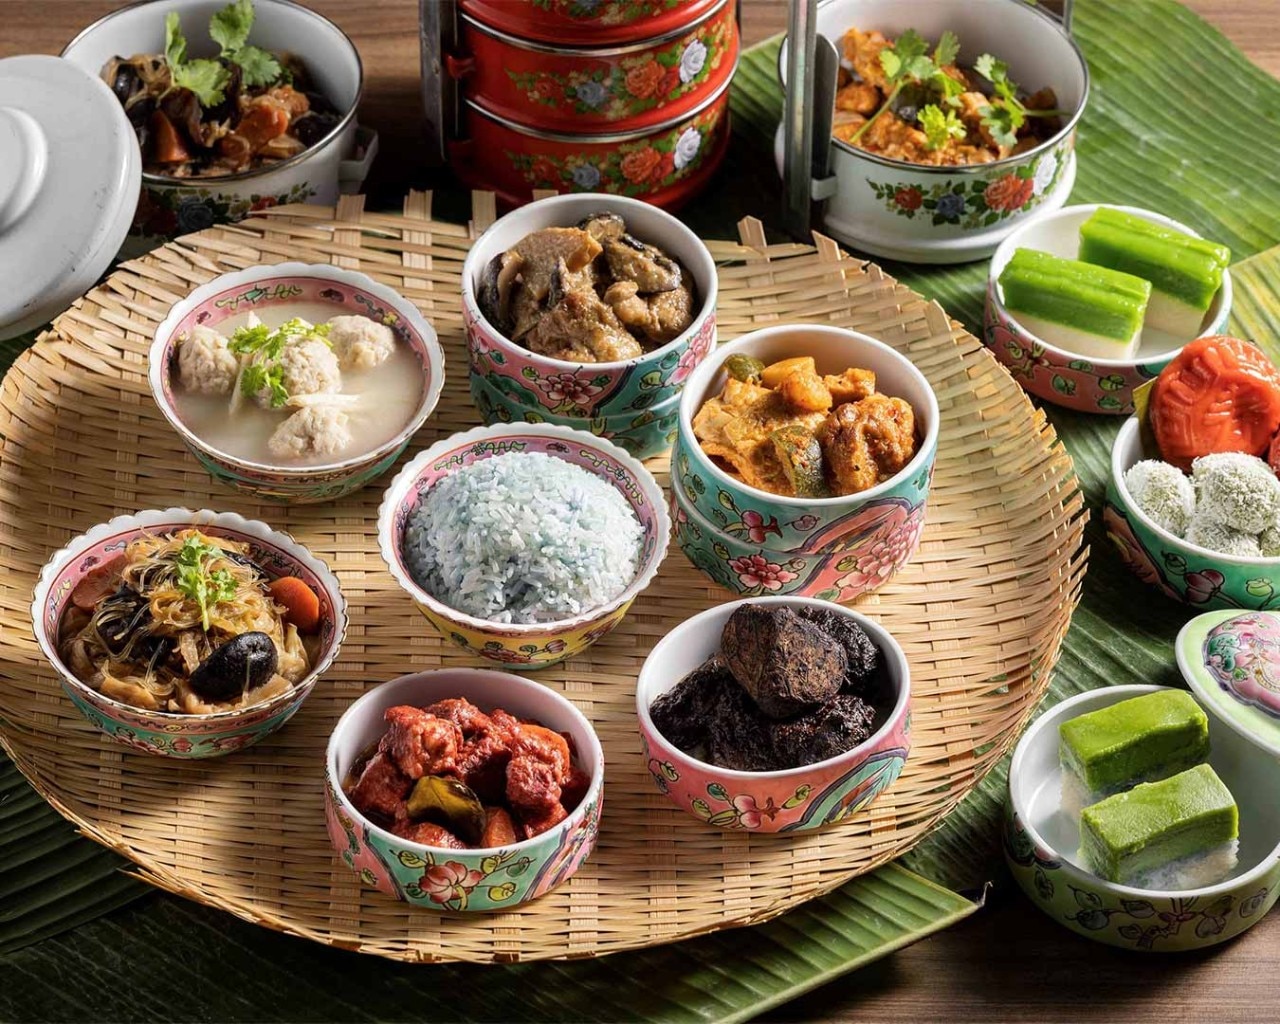 Blue pea rice and Peranakan dishes available at RISE, the best dinner places in Singapore